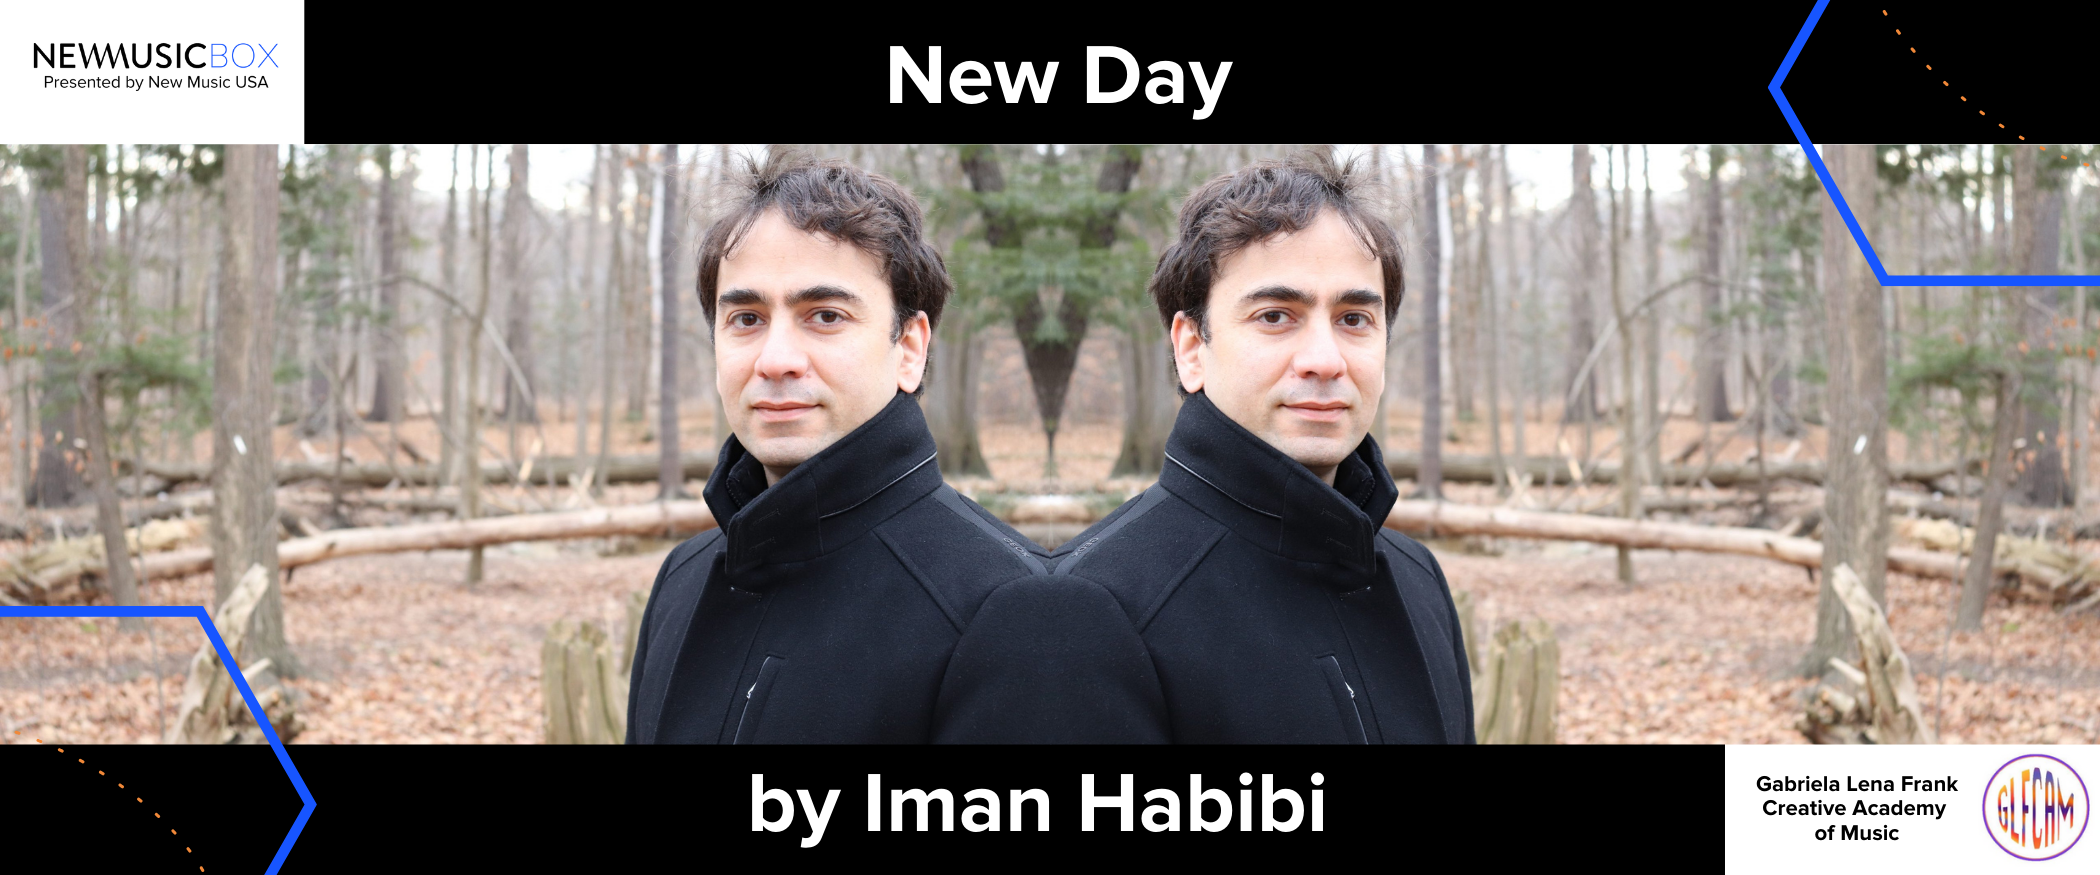 Mirror images of Iman Habibi with branded GLFCAM Guest Editor and New Music USA logos